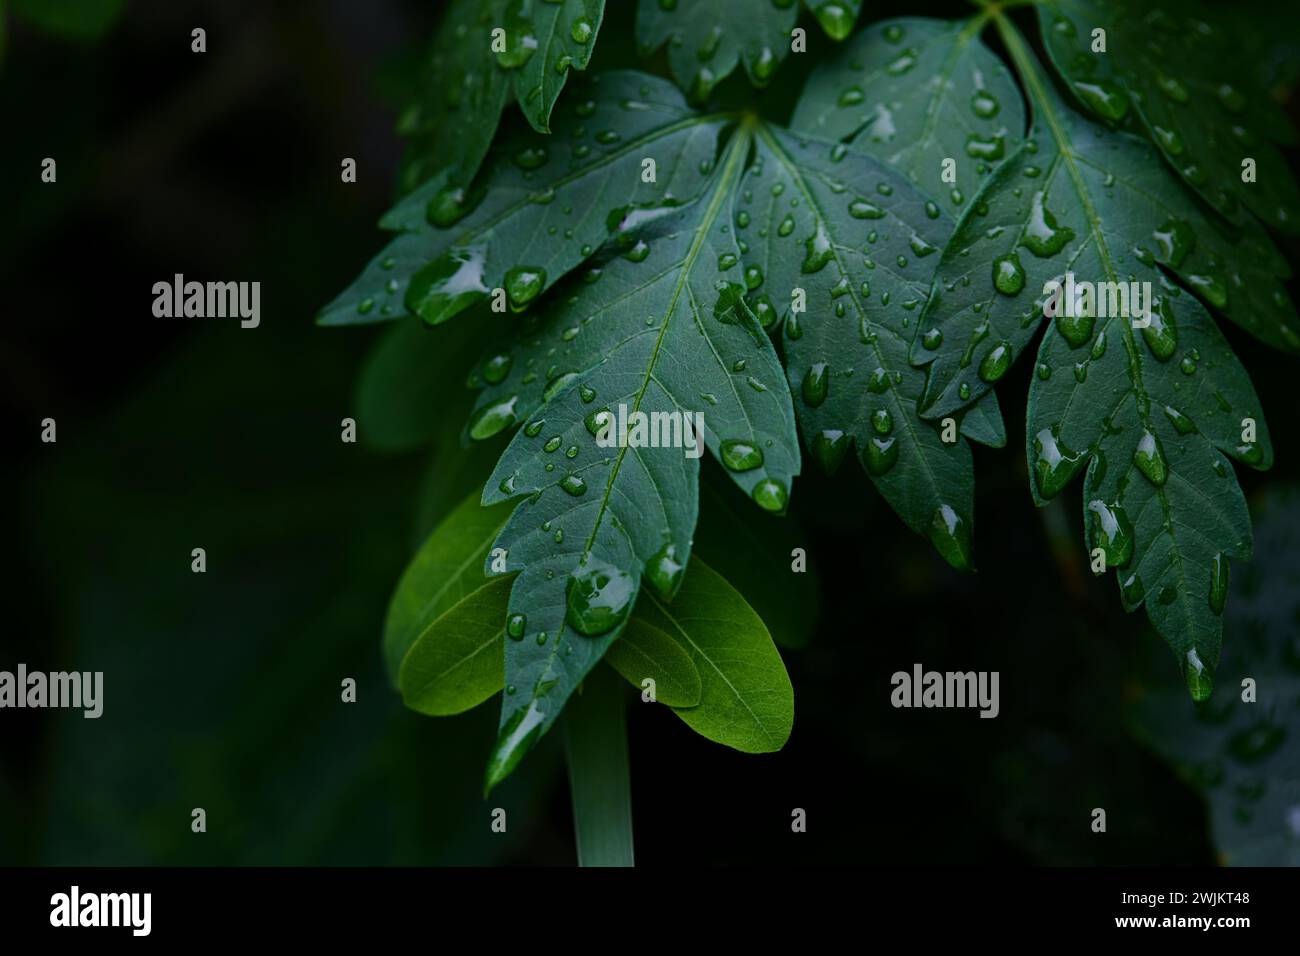 Close-up view of raindrops on green leaf Stock Photo